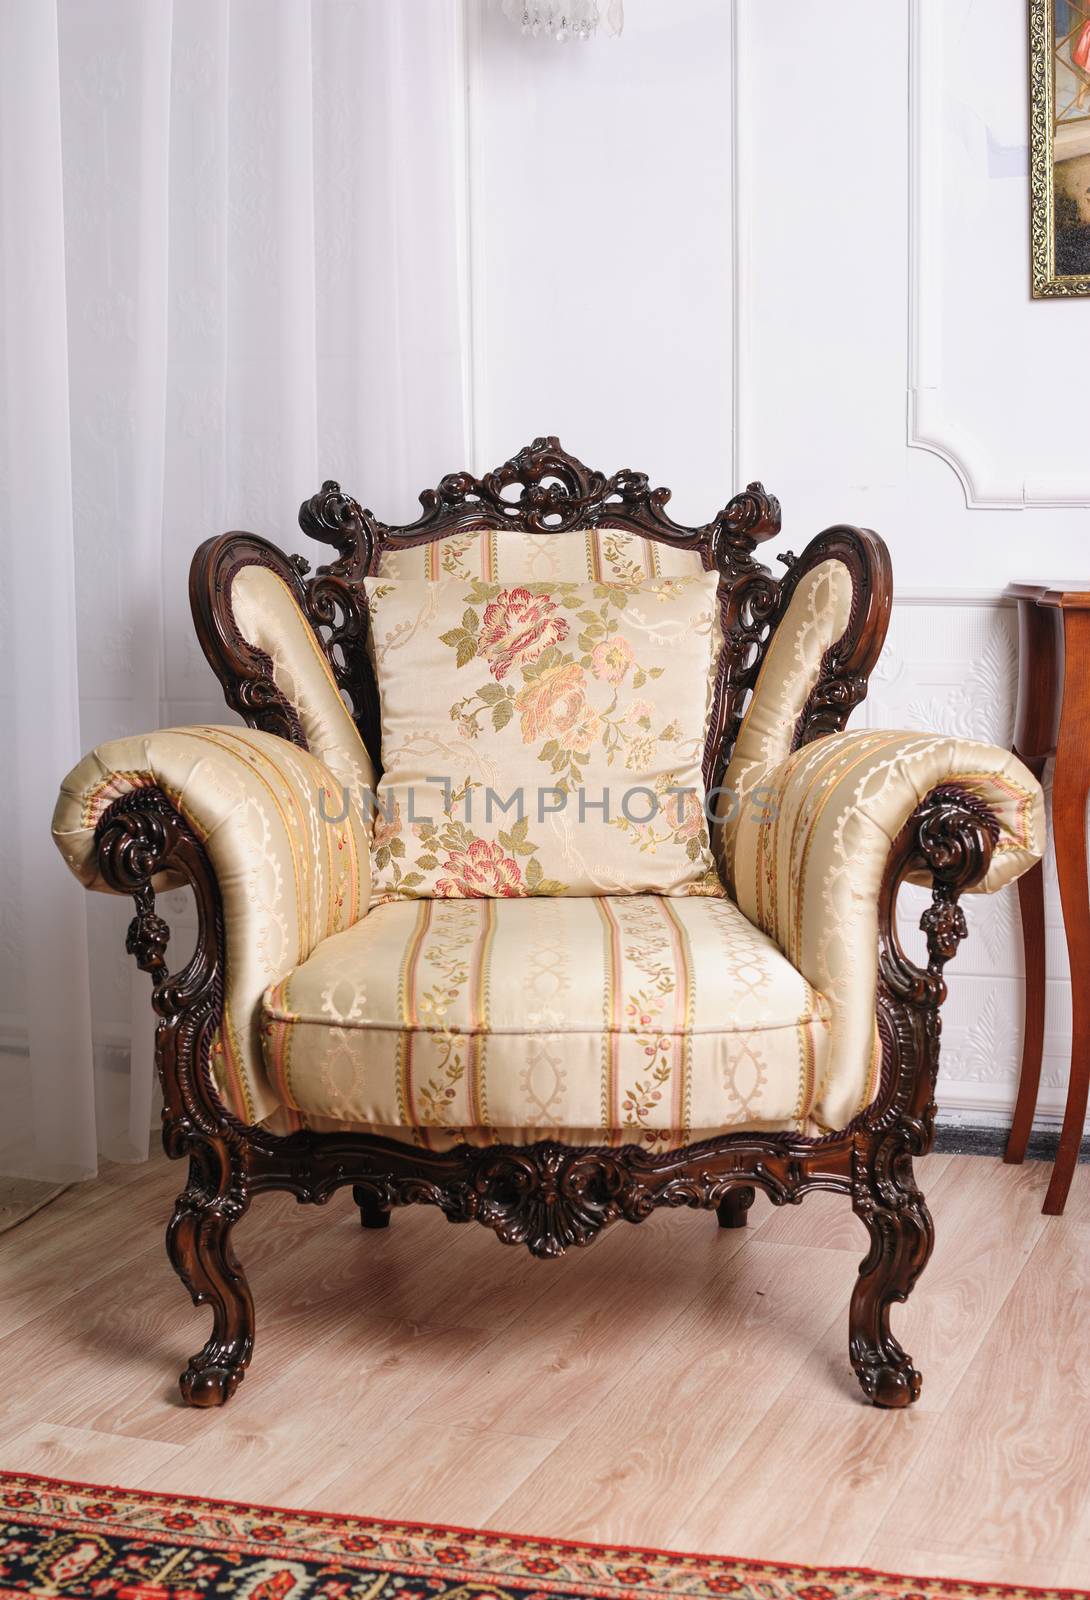 Luxury wooden antique chair in the room.